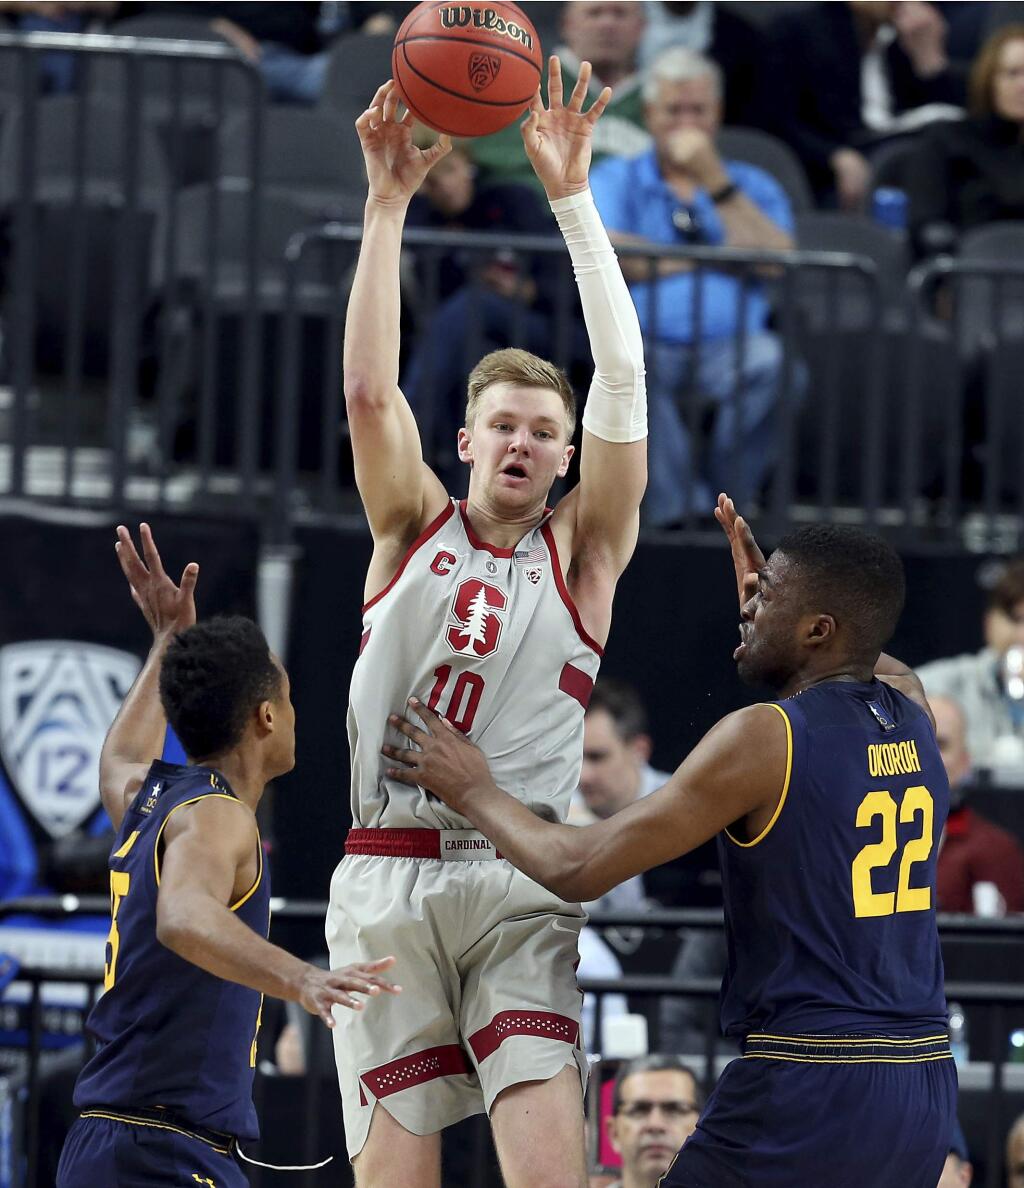 Stanford's Michael Humphrey, center, passes while covered by Cal's Roman Davis, left, and Kingsley Okoroh, right, during the first half in the first round of the Pac-12 men's tournament Wednesday, March 7, 2018, in Las Vegas. (AP Photo/Isaac Brekken)